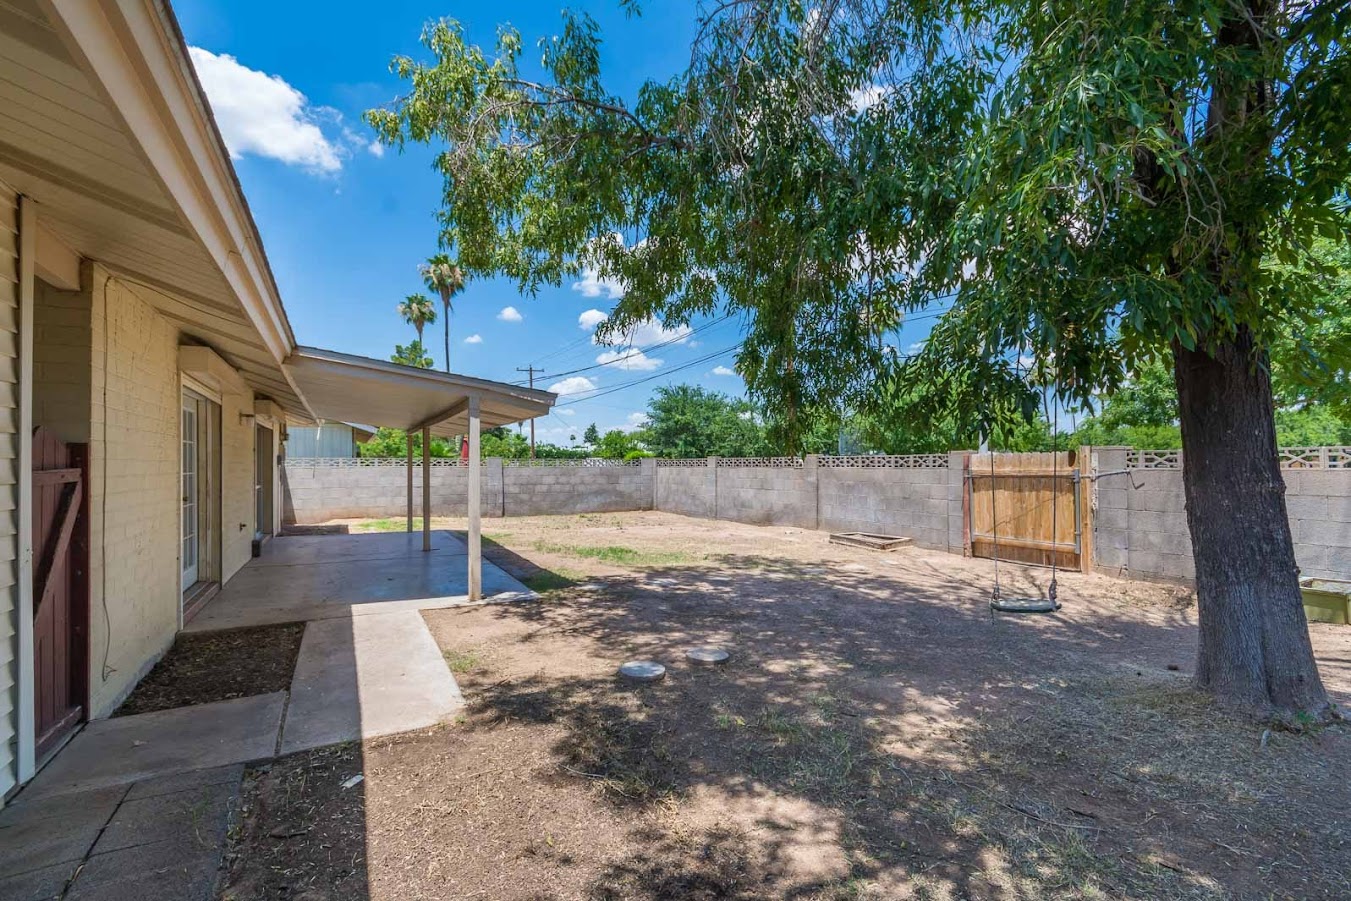 backyard photo for Tempe home for sale